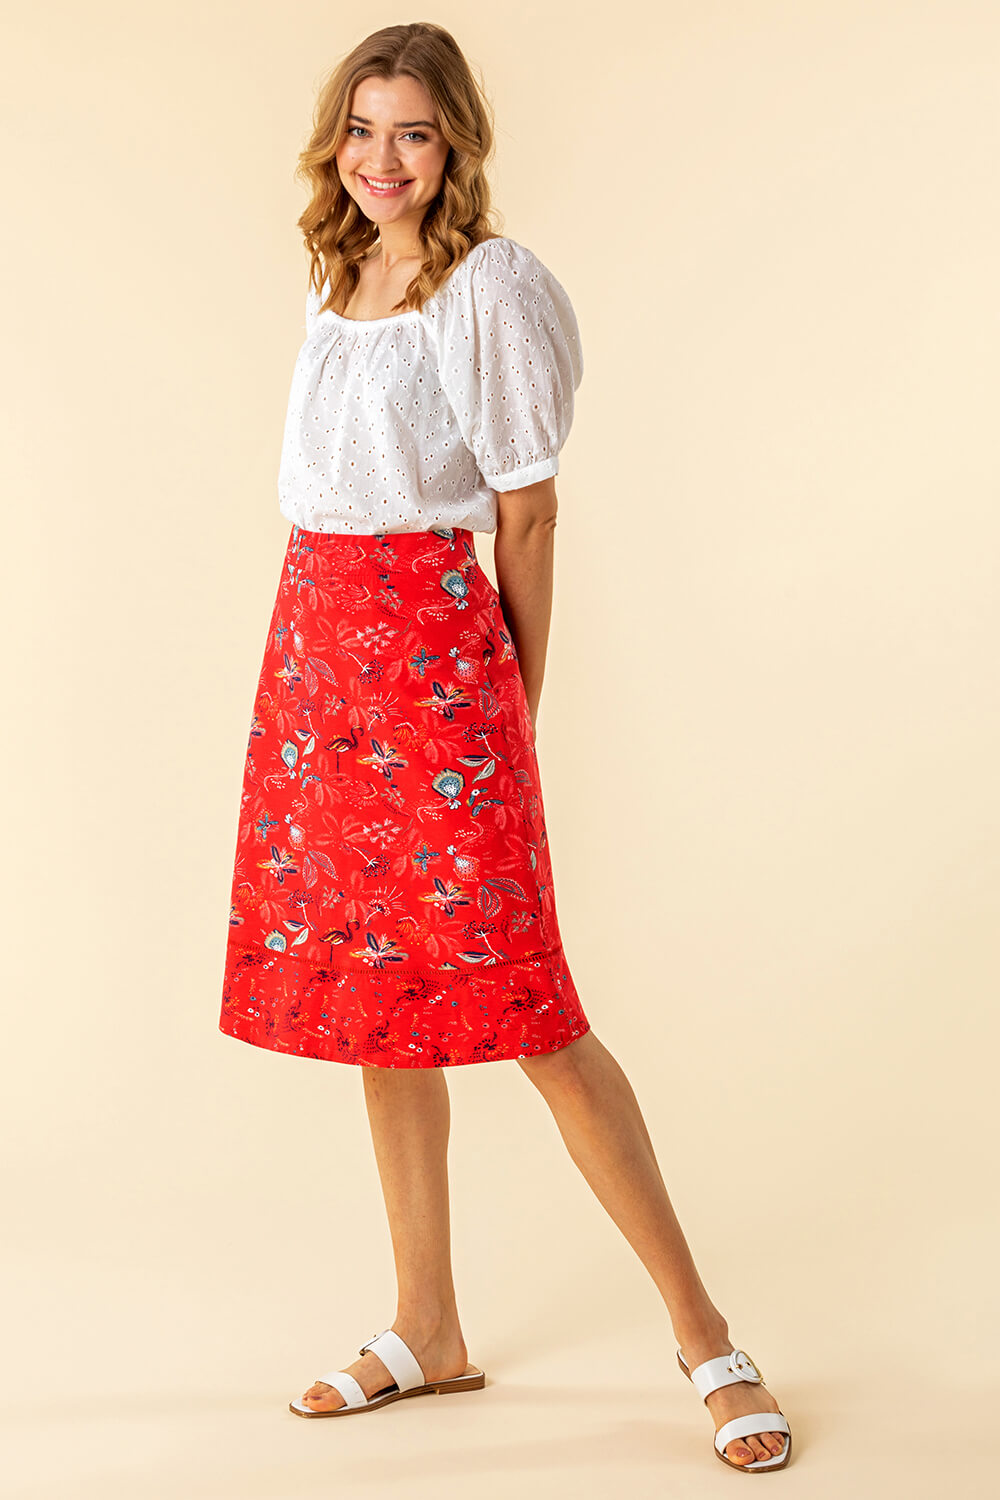 Red A Line Tropical Print Skirt, Image 4 of 4